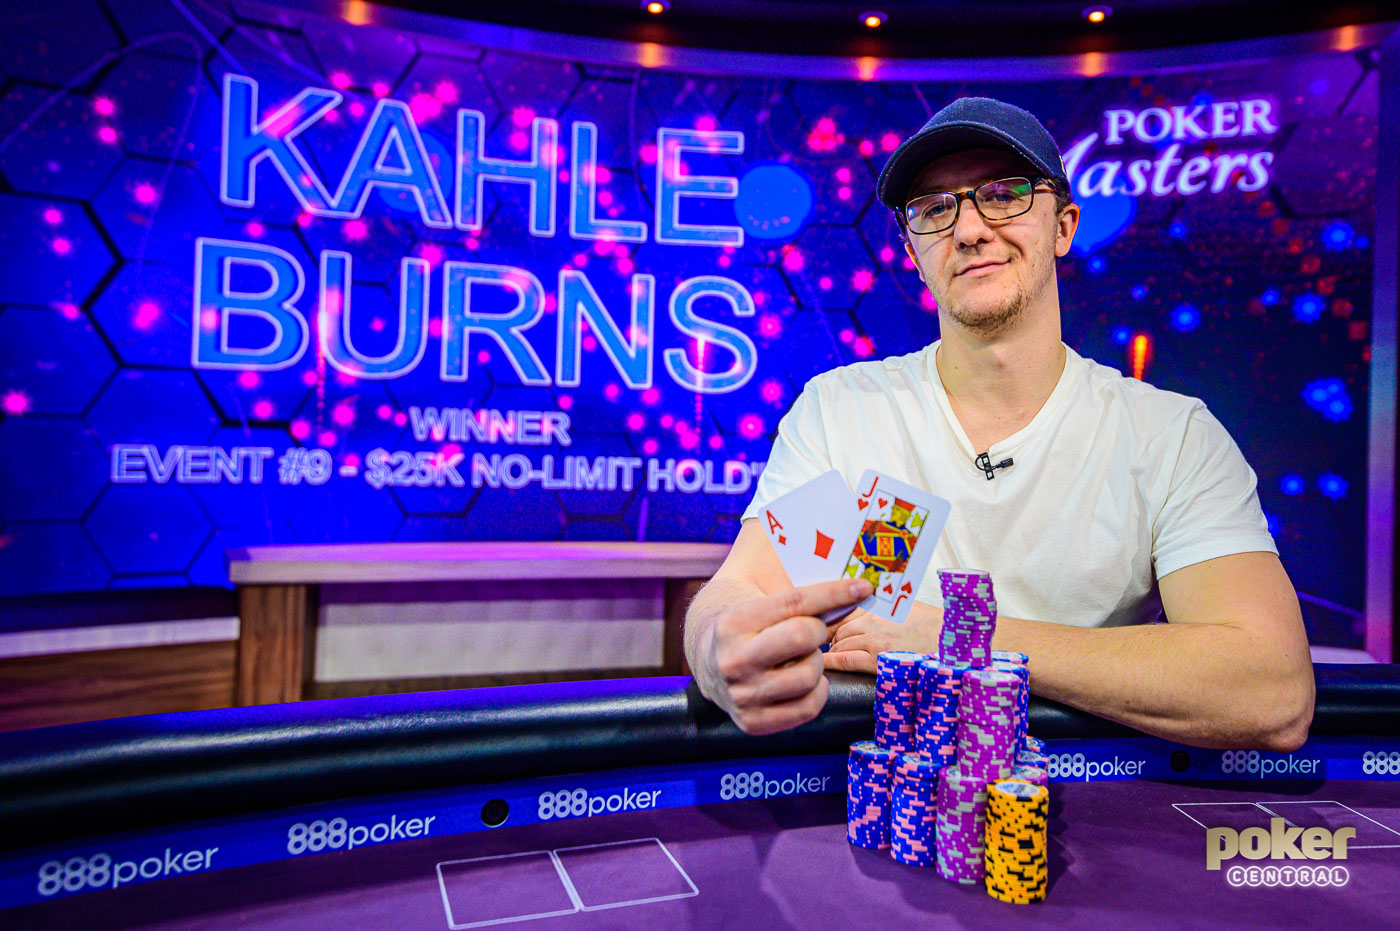 Kahle Burns wins Event #9 of the 2019 Poker Masters.